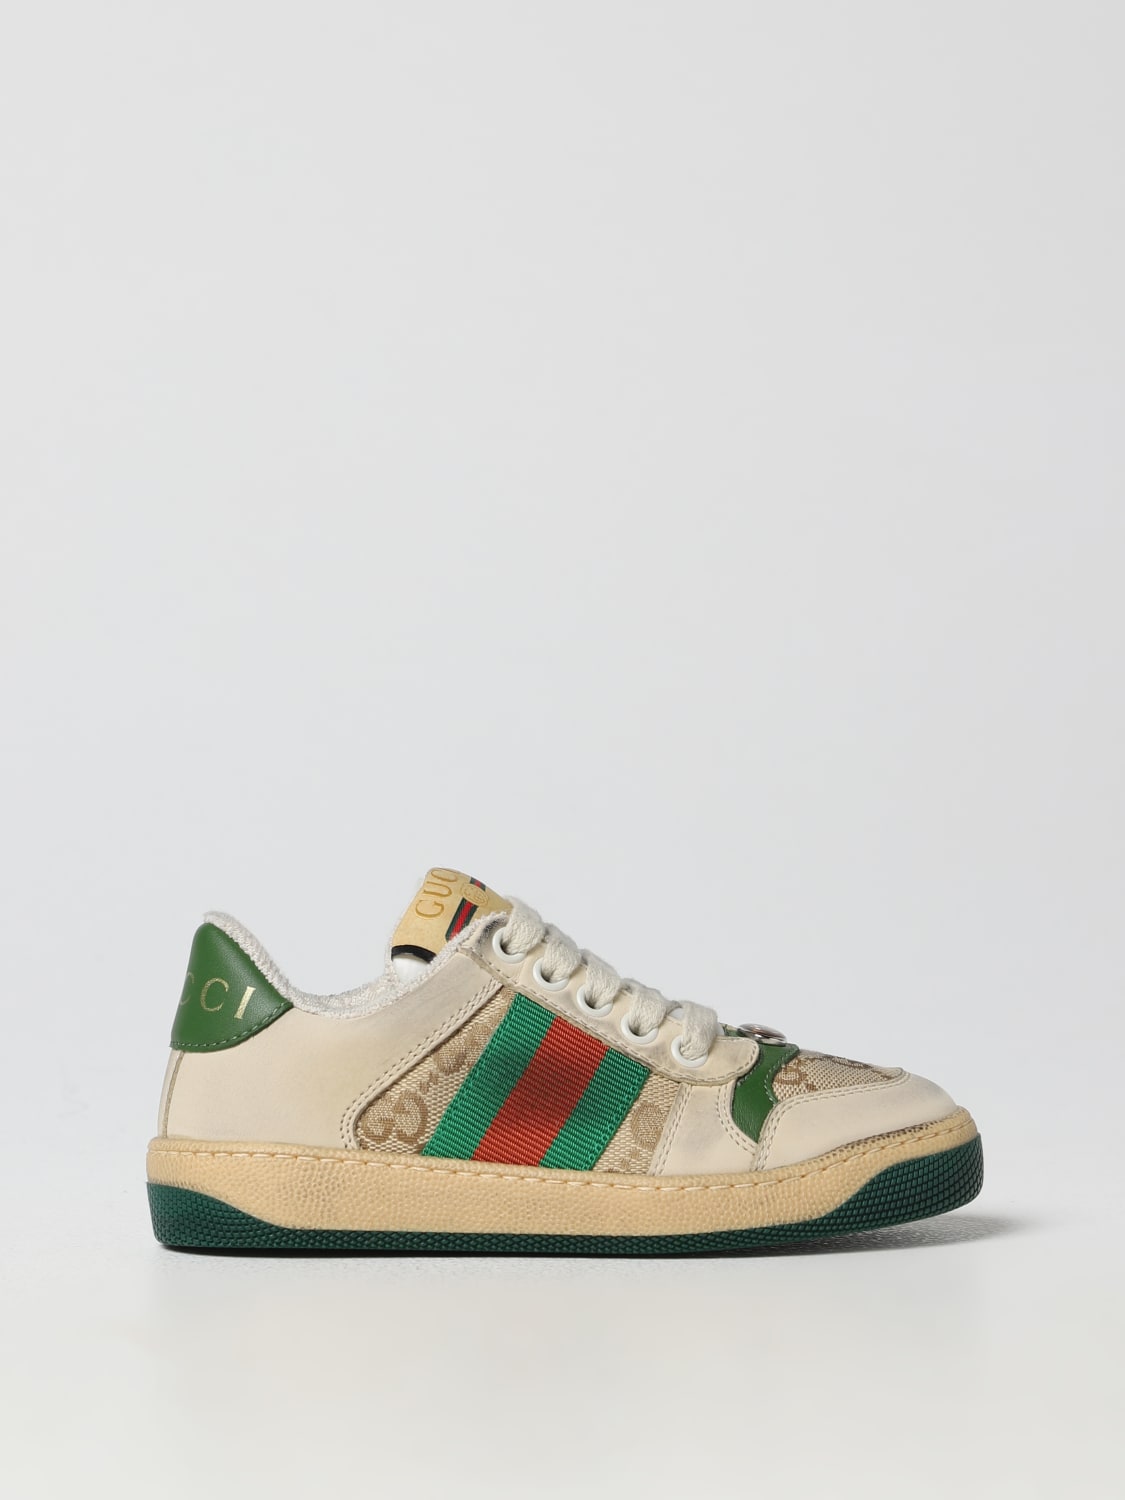 sneakers for boys - Beige | Gucci sneakers 626620G1760 on GIGLIO.COM